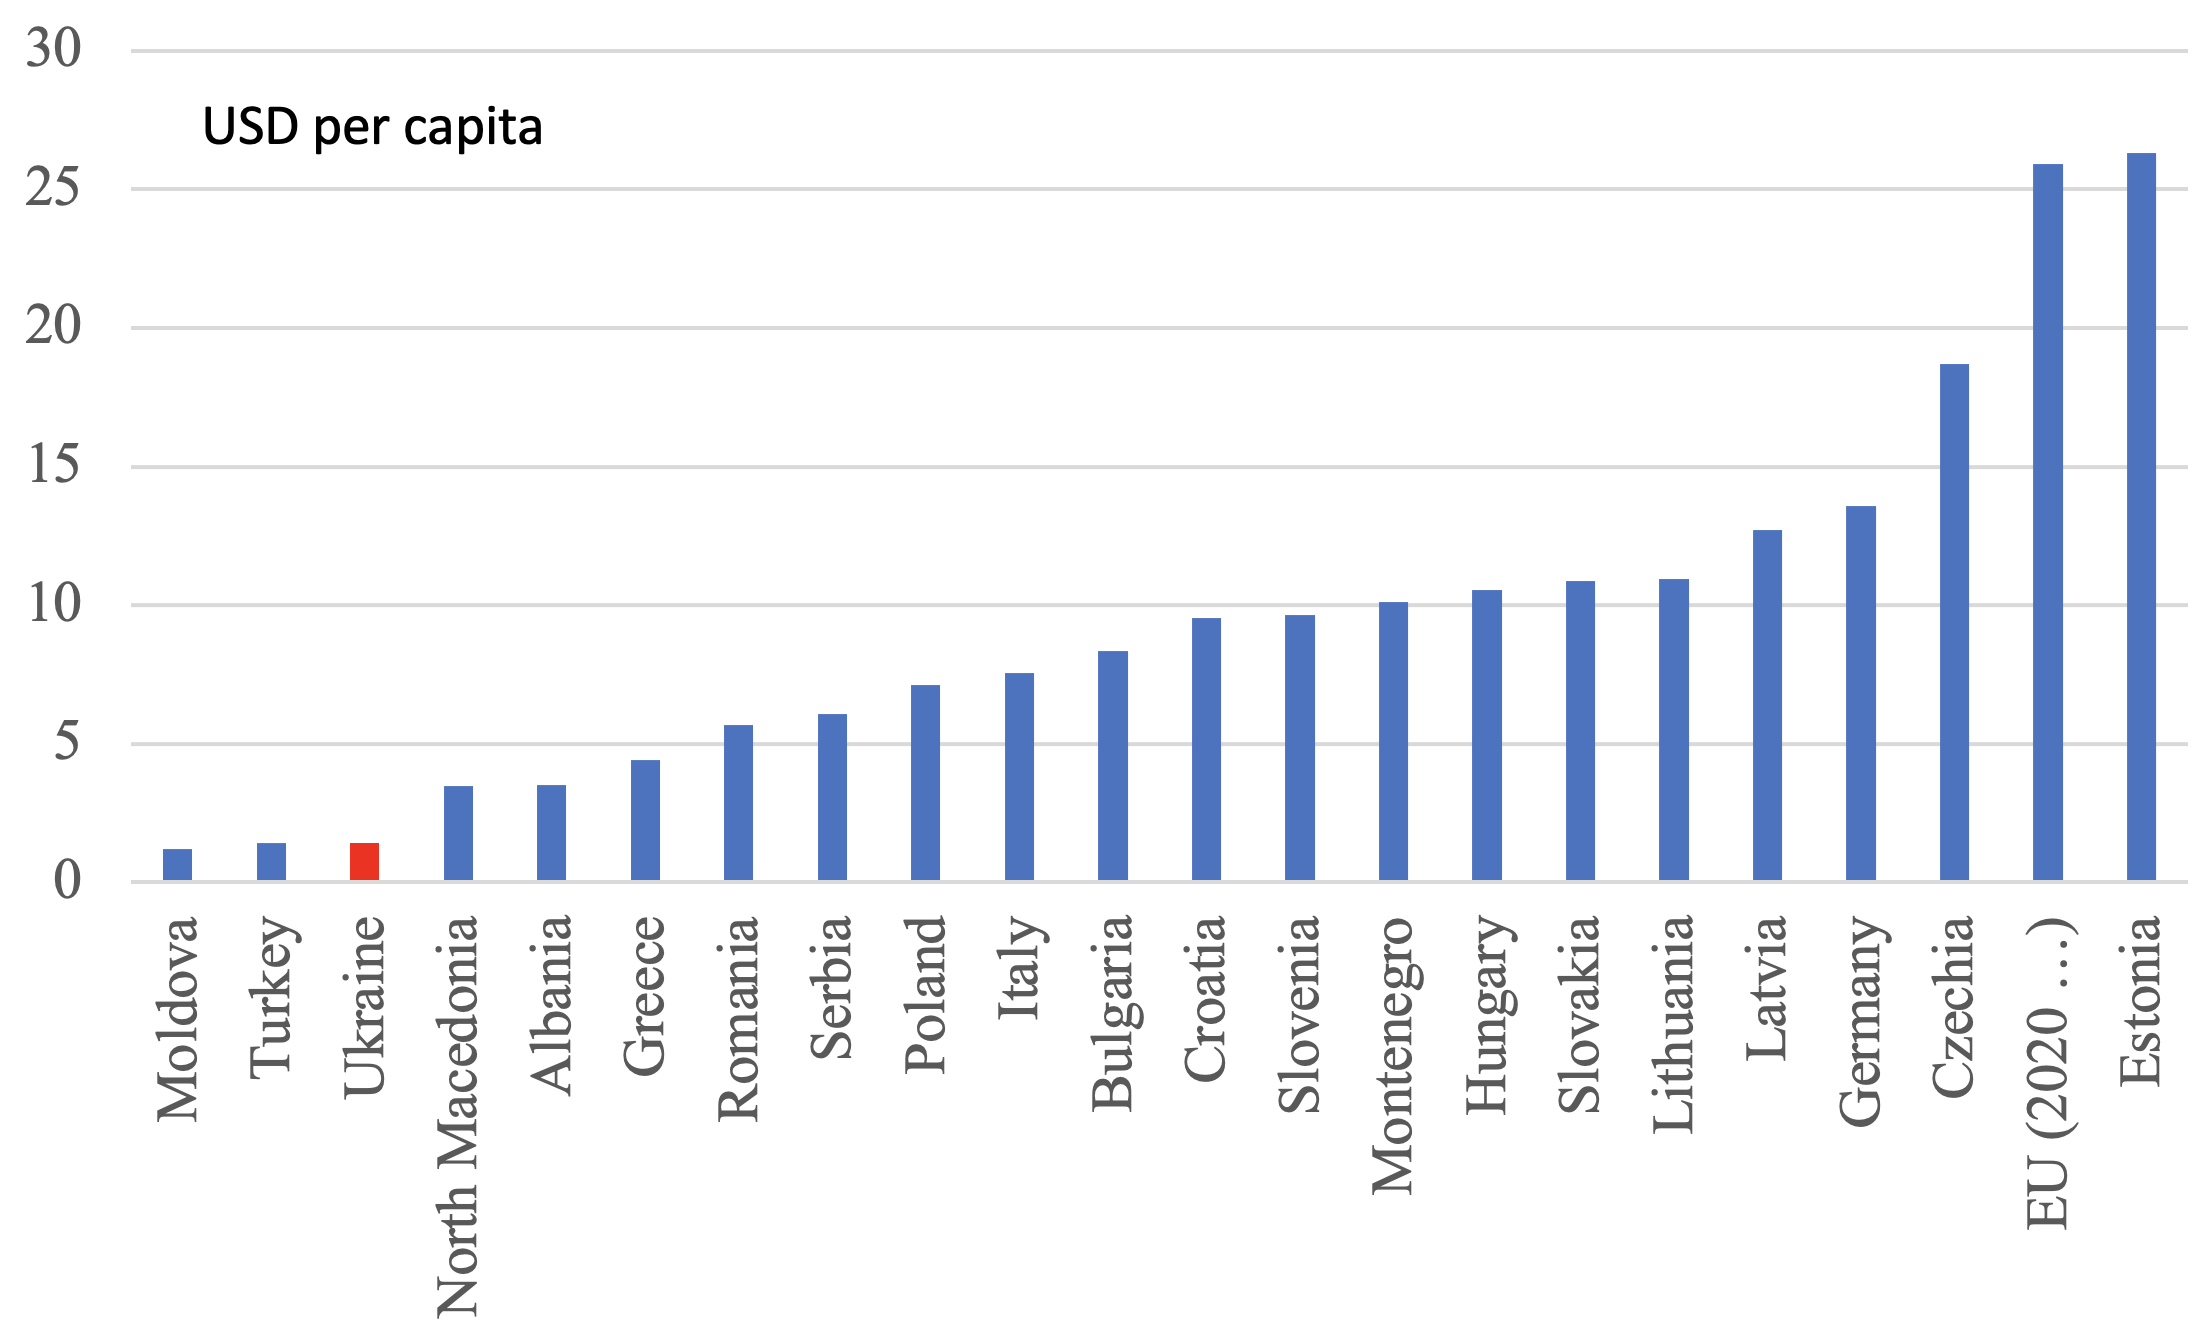 Figure 2 Foreign direct investment stock per capita, 2021